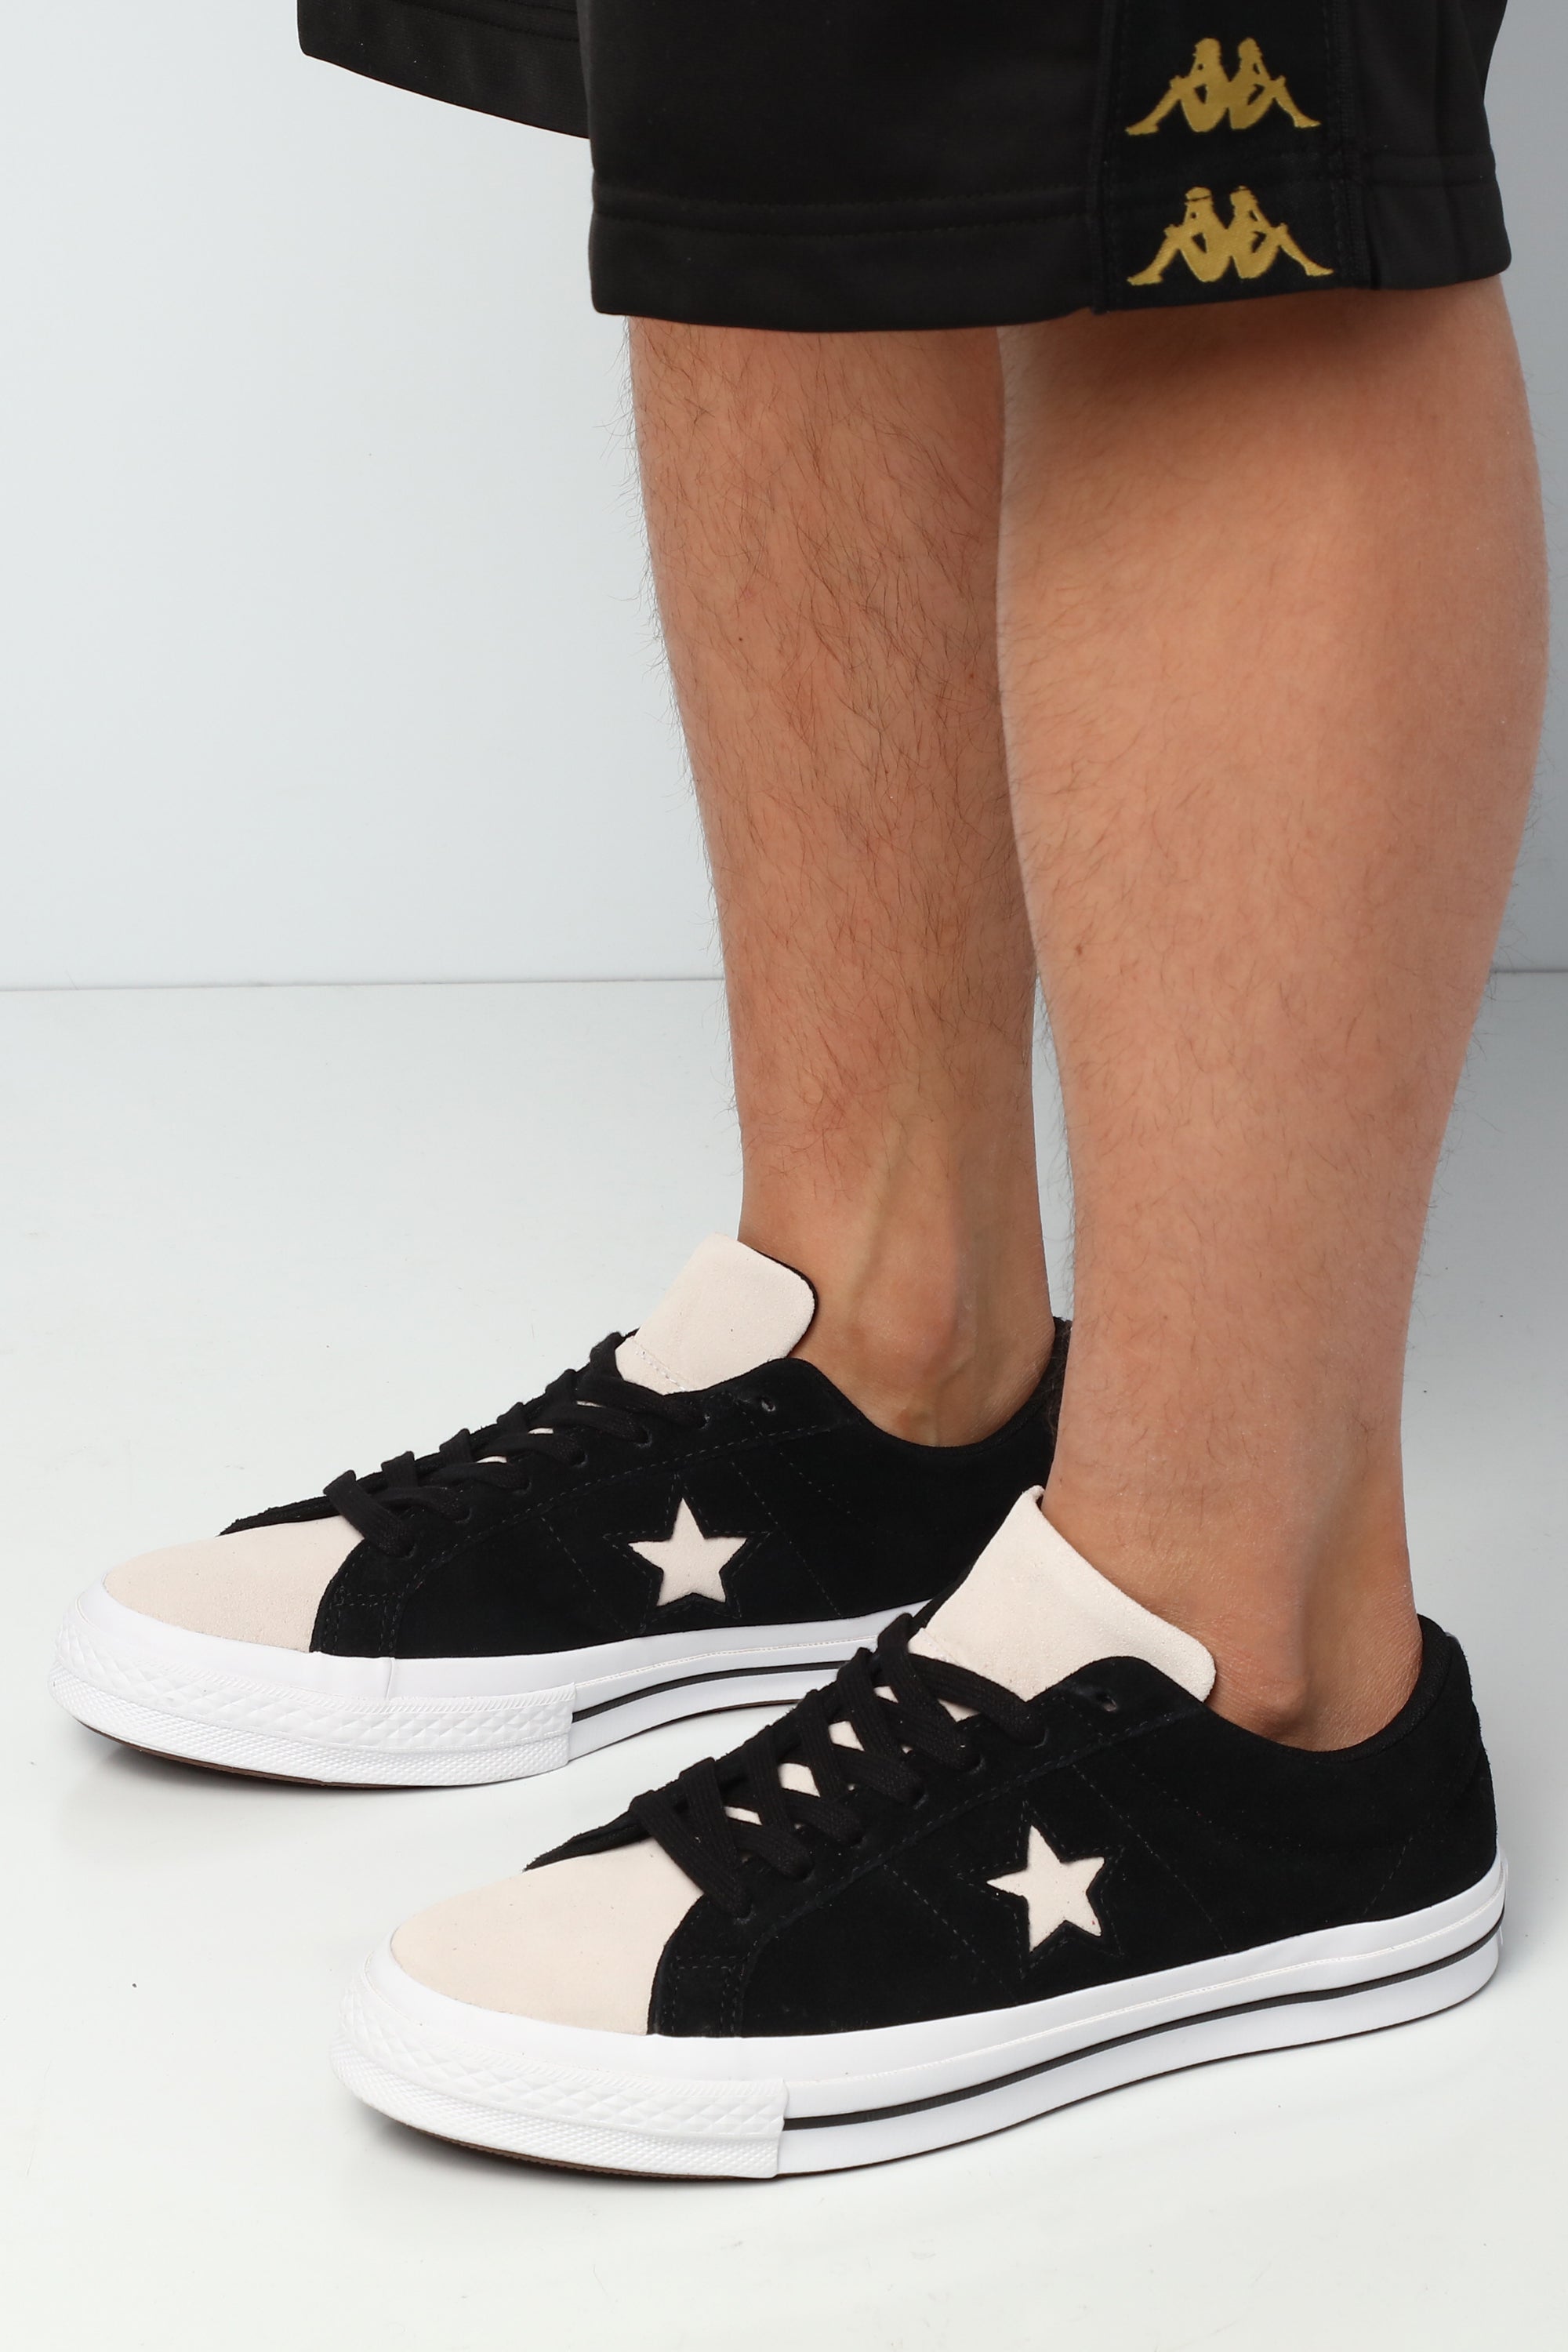 converse one star fit guide